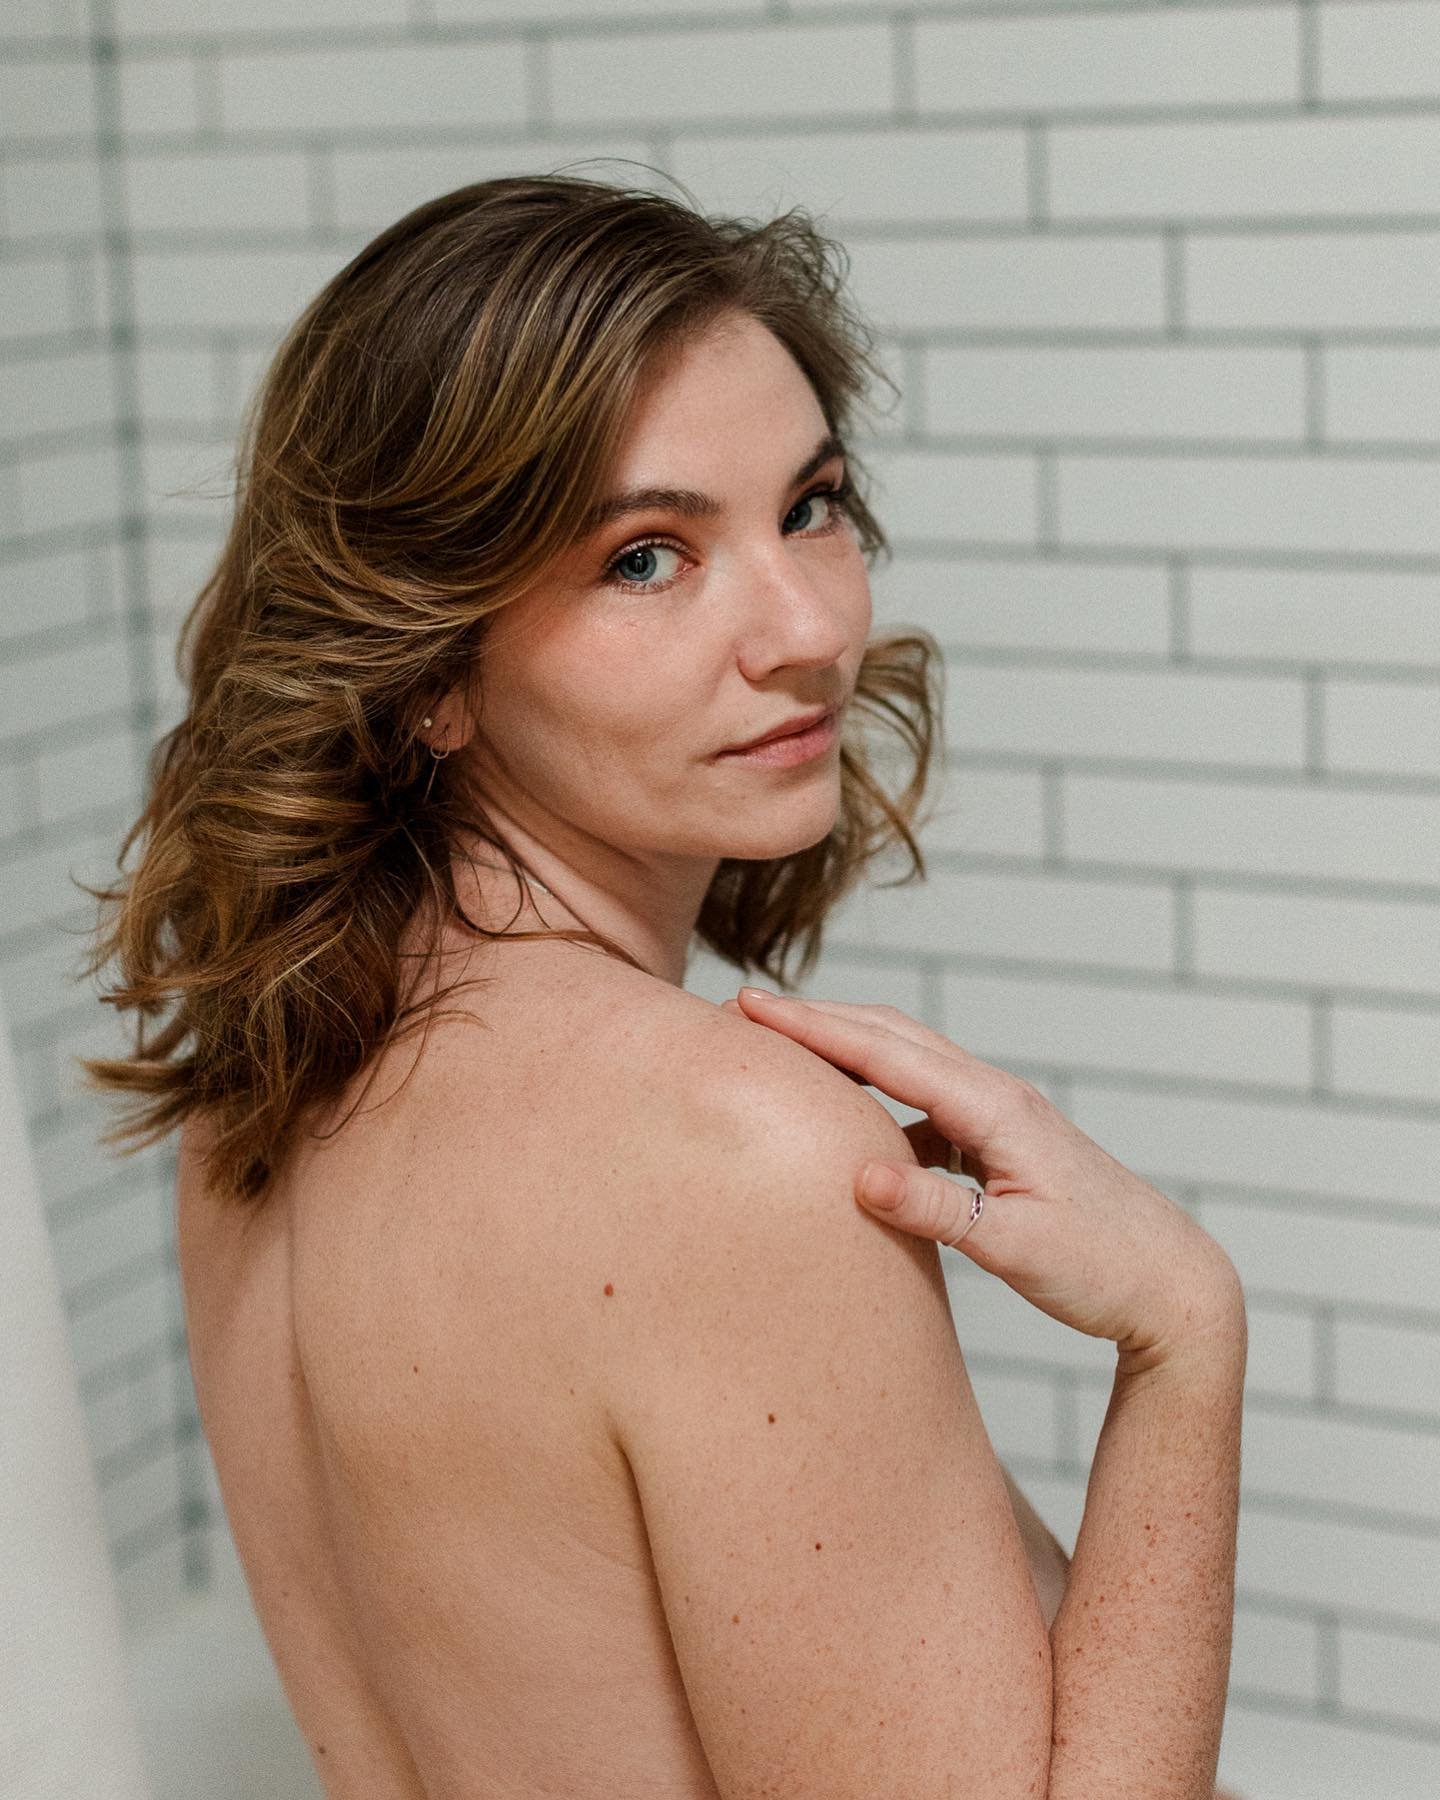 Who wants to use my studio shower for their next session??⁠
⁠
Madeline decided to take an actual shower during her session, and she loved how these portraits allowed her to transform an everyday ritual into a work of art